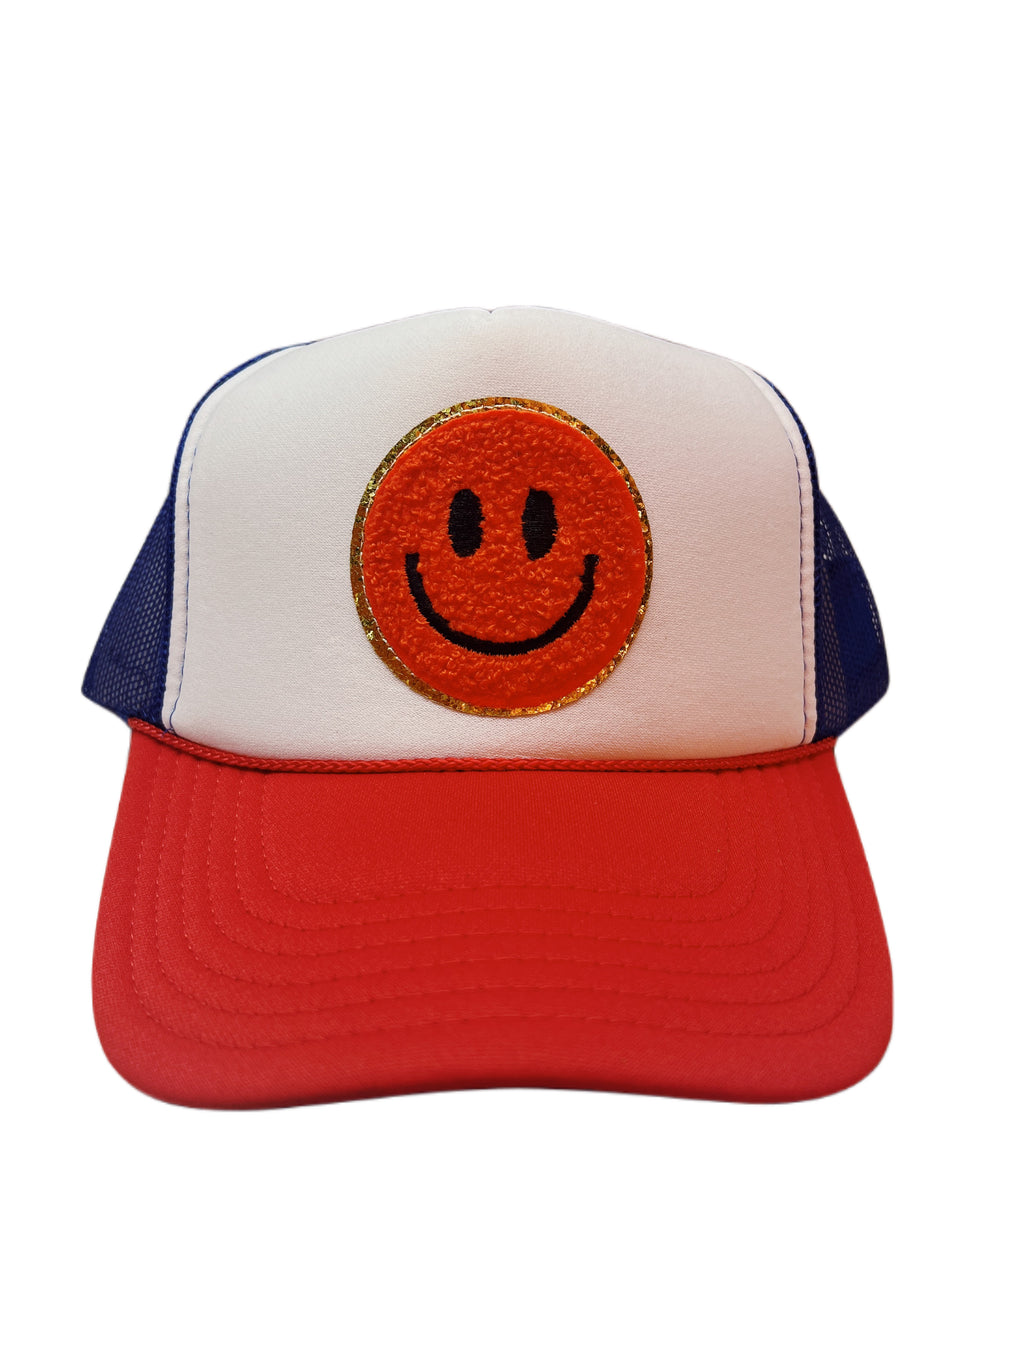 RED WHITE AND BLUE SMILEY TRUCKER HAT